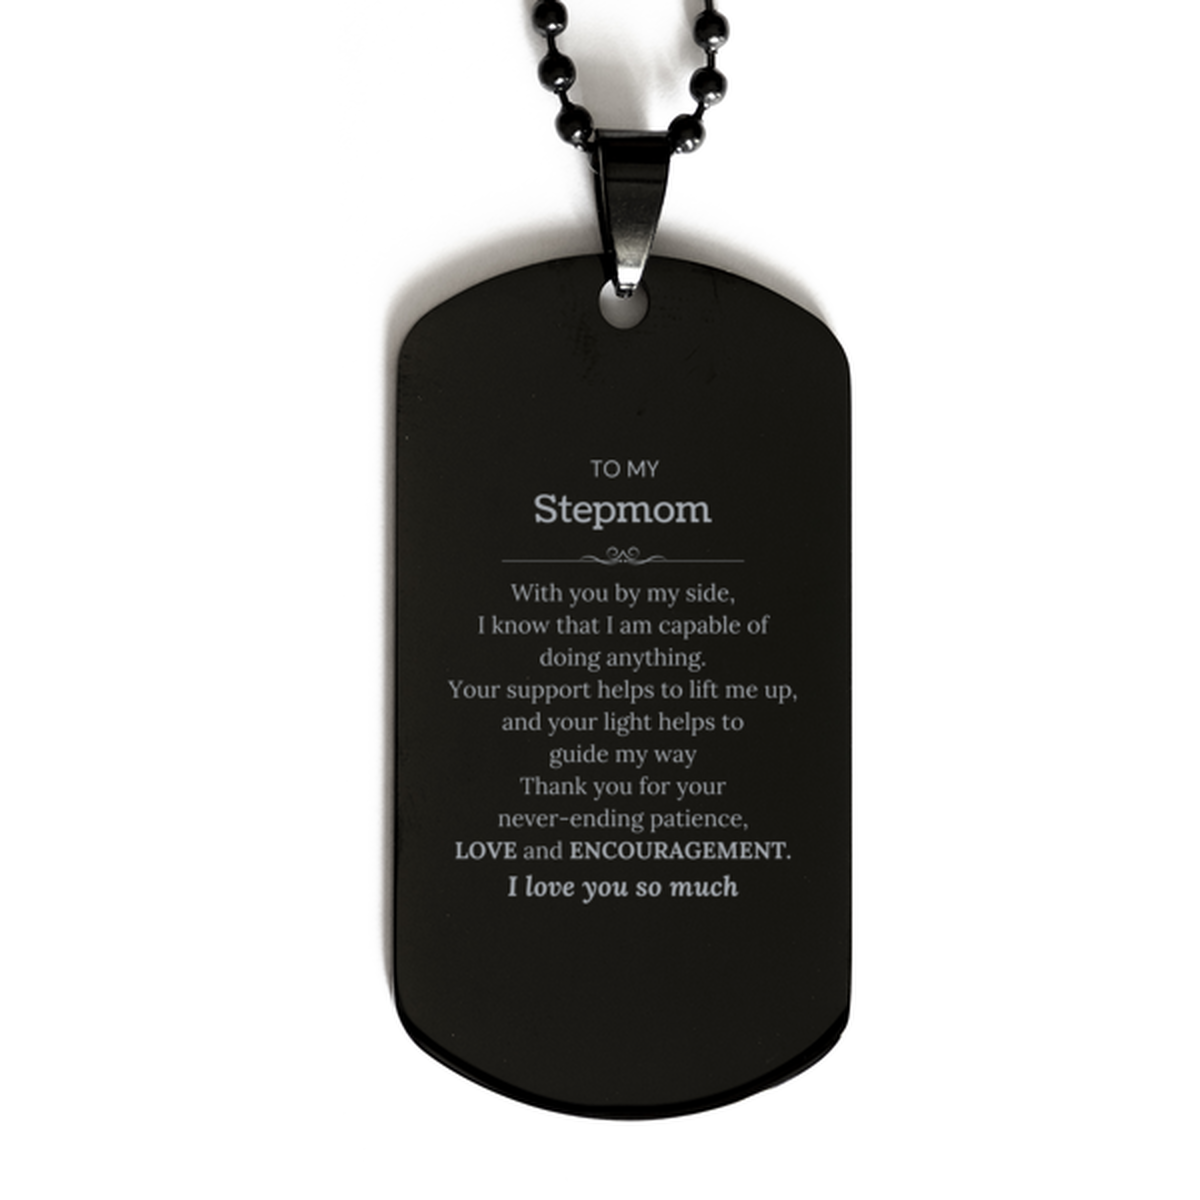 Appreciation Stepmom Black Dog Tag Gifts, To My Stepmom Birthday Christmas Wedding Keepsake Gifts for Stepmom With you by my side, I know that I am capable of doing anything. I love you so much